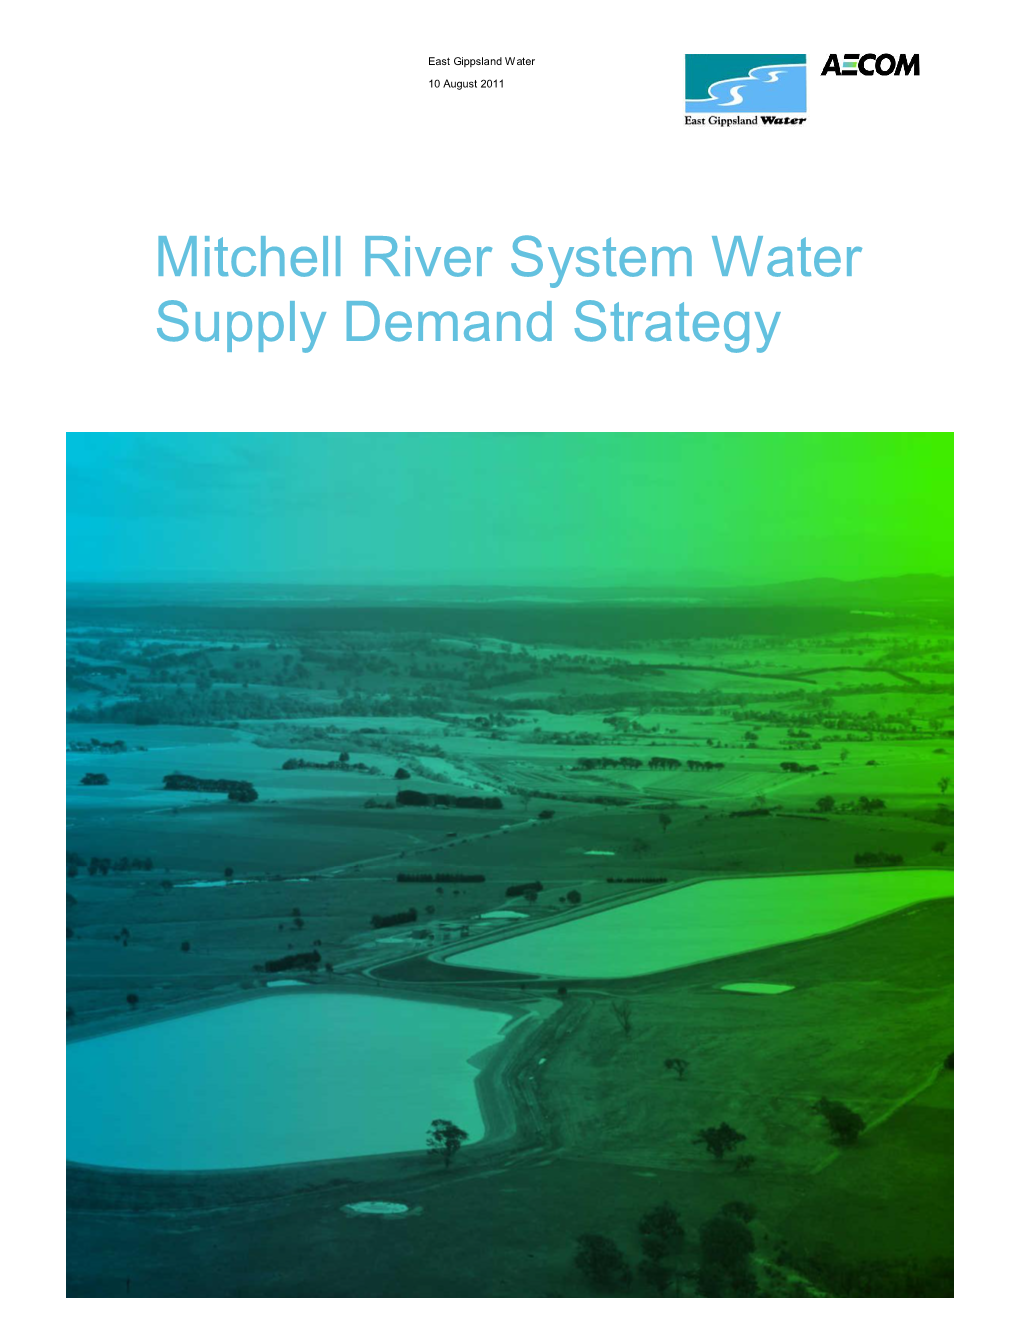 Mitchell River System Water Supply Demand Strategy